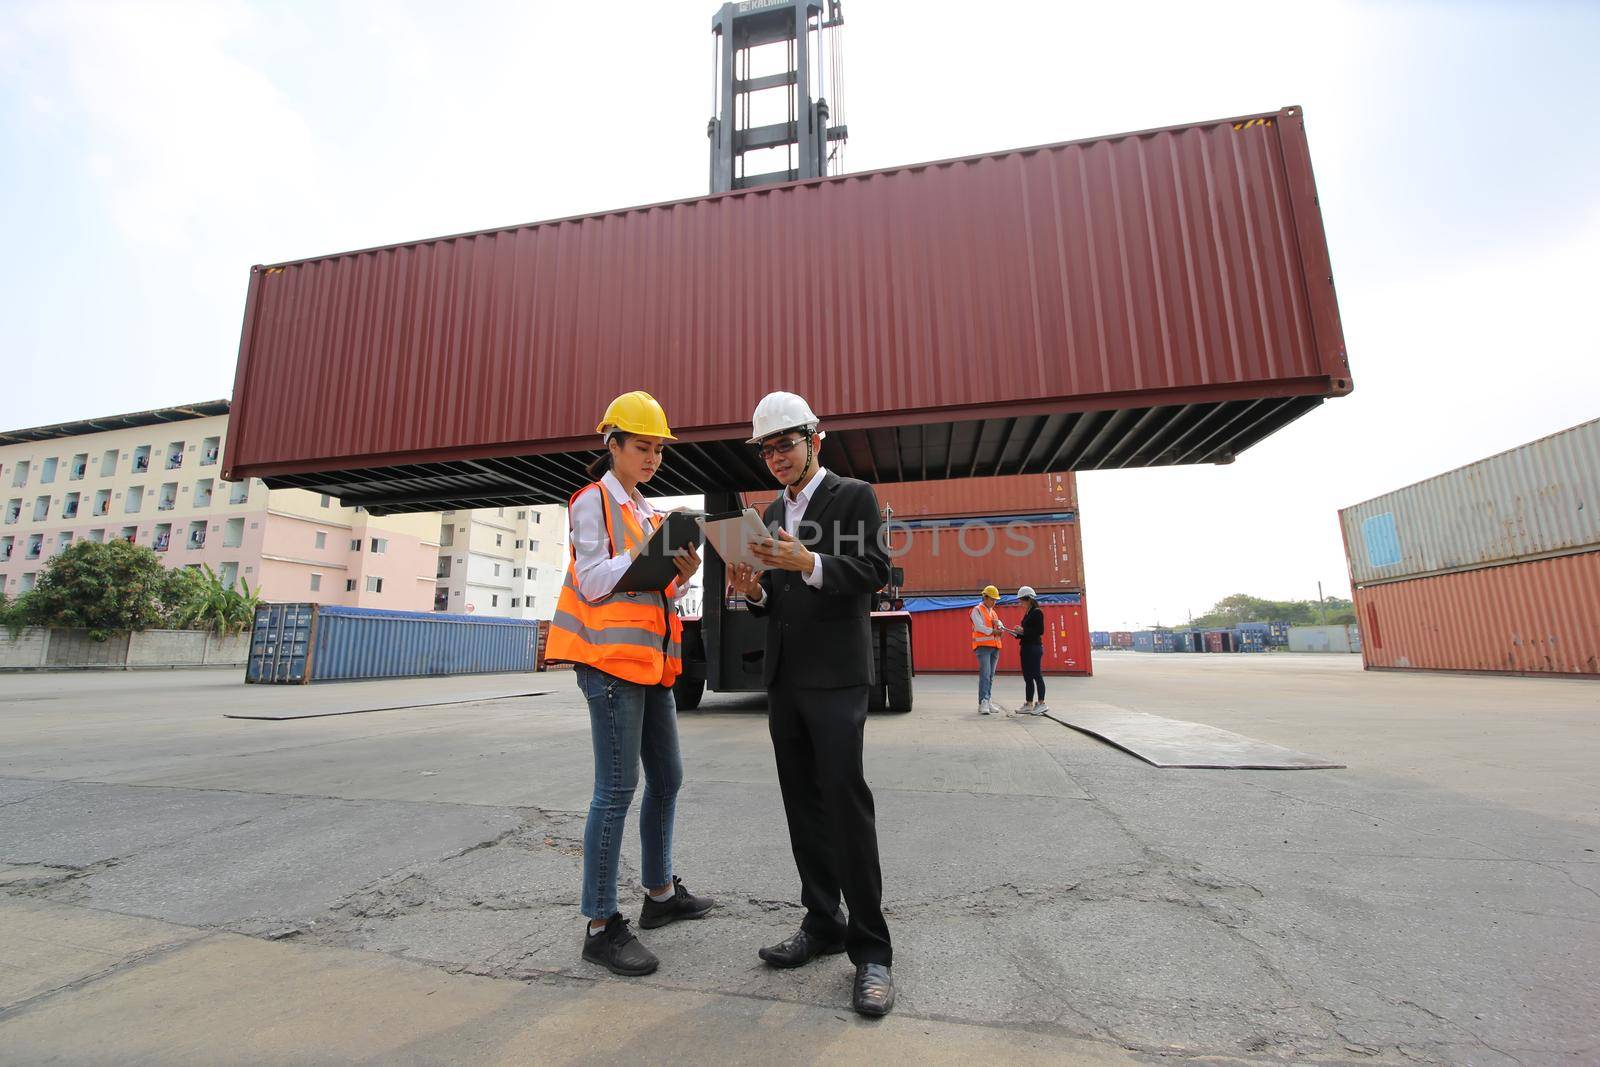 Foreman control loading Containers box from Cargo freight ship for import export. Container Warehouse Worker